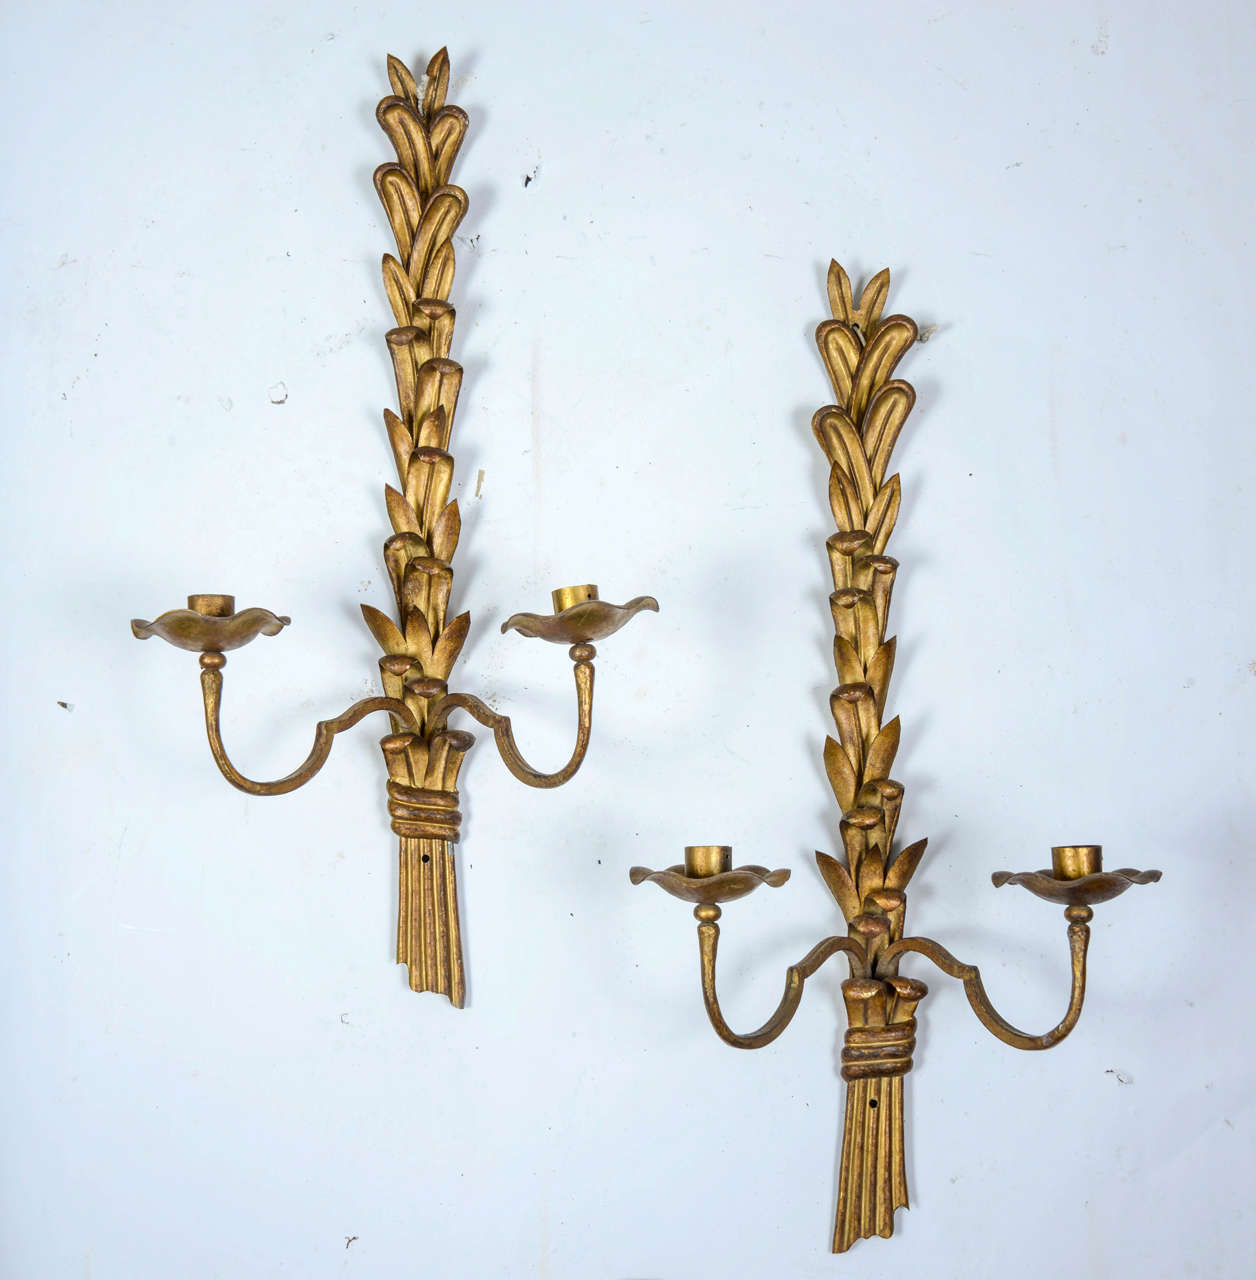 Pair of 1940s - 1950s sconces in gilt leave wrought iron representing a bundle of leaves held by a stylized ribbon. Two lighted arms with gilt wrought iron sconces and cups.

Can be wired on demand.